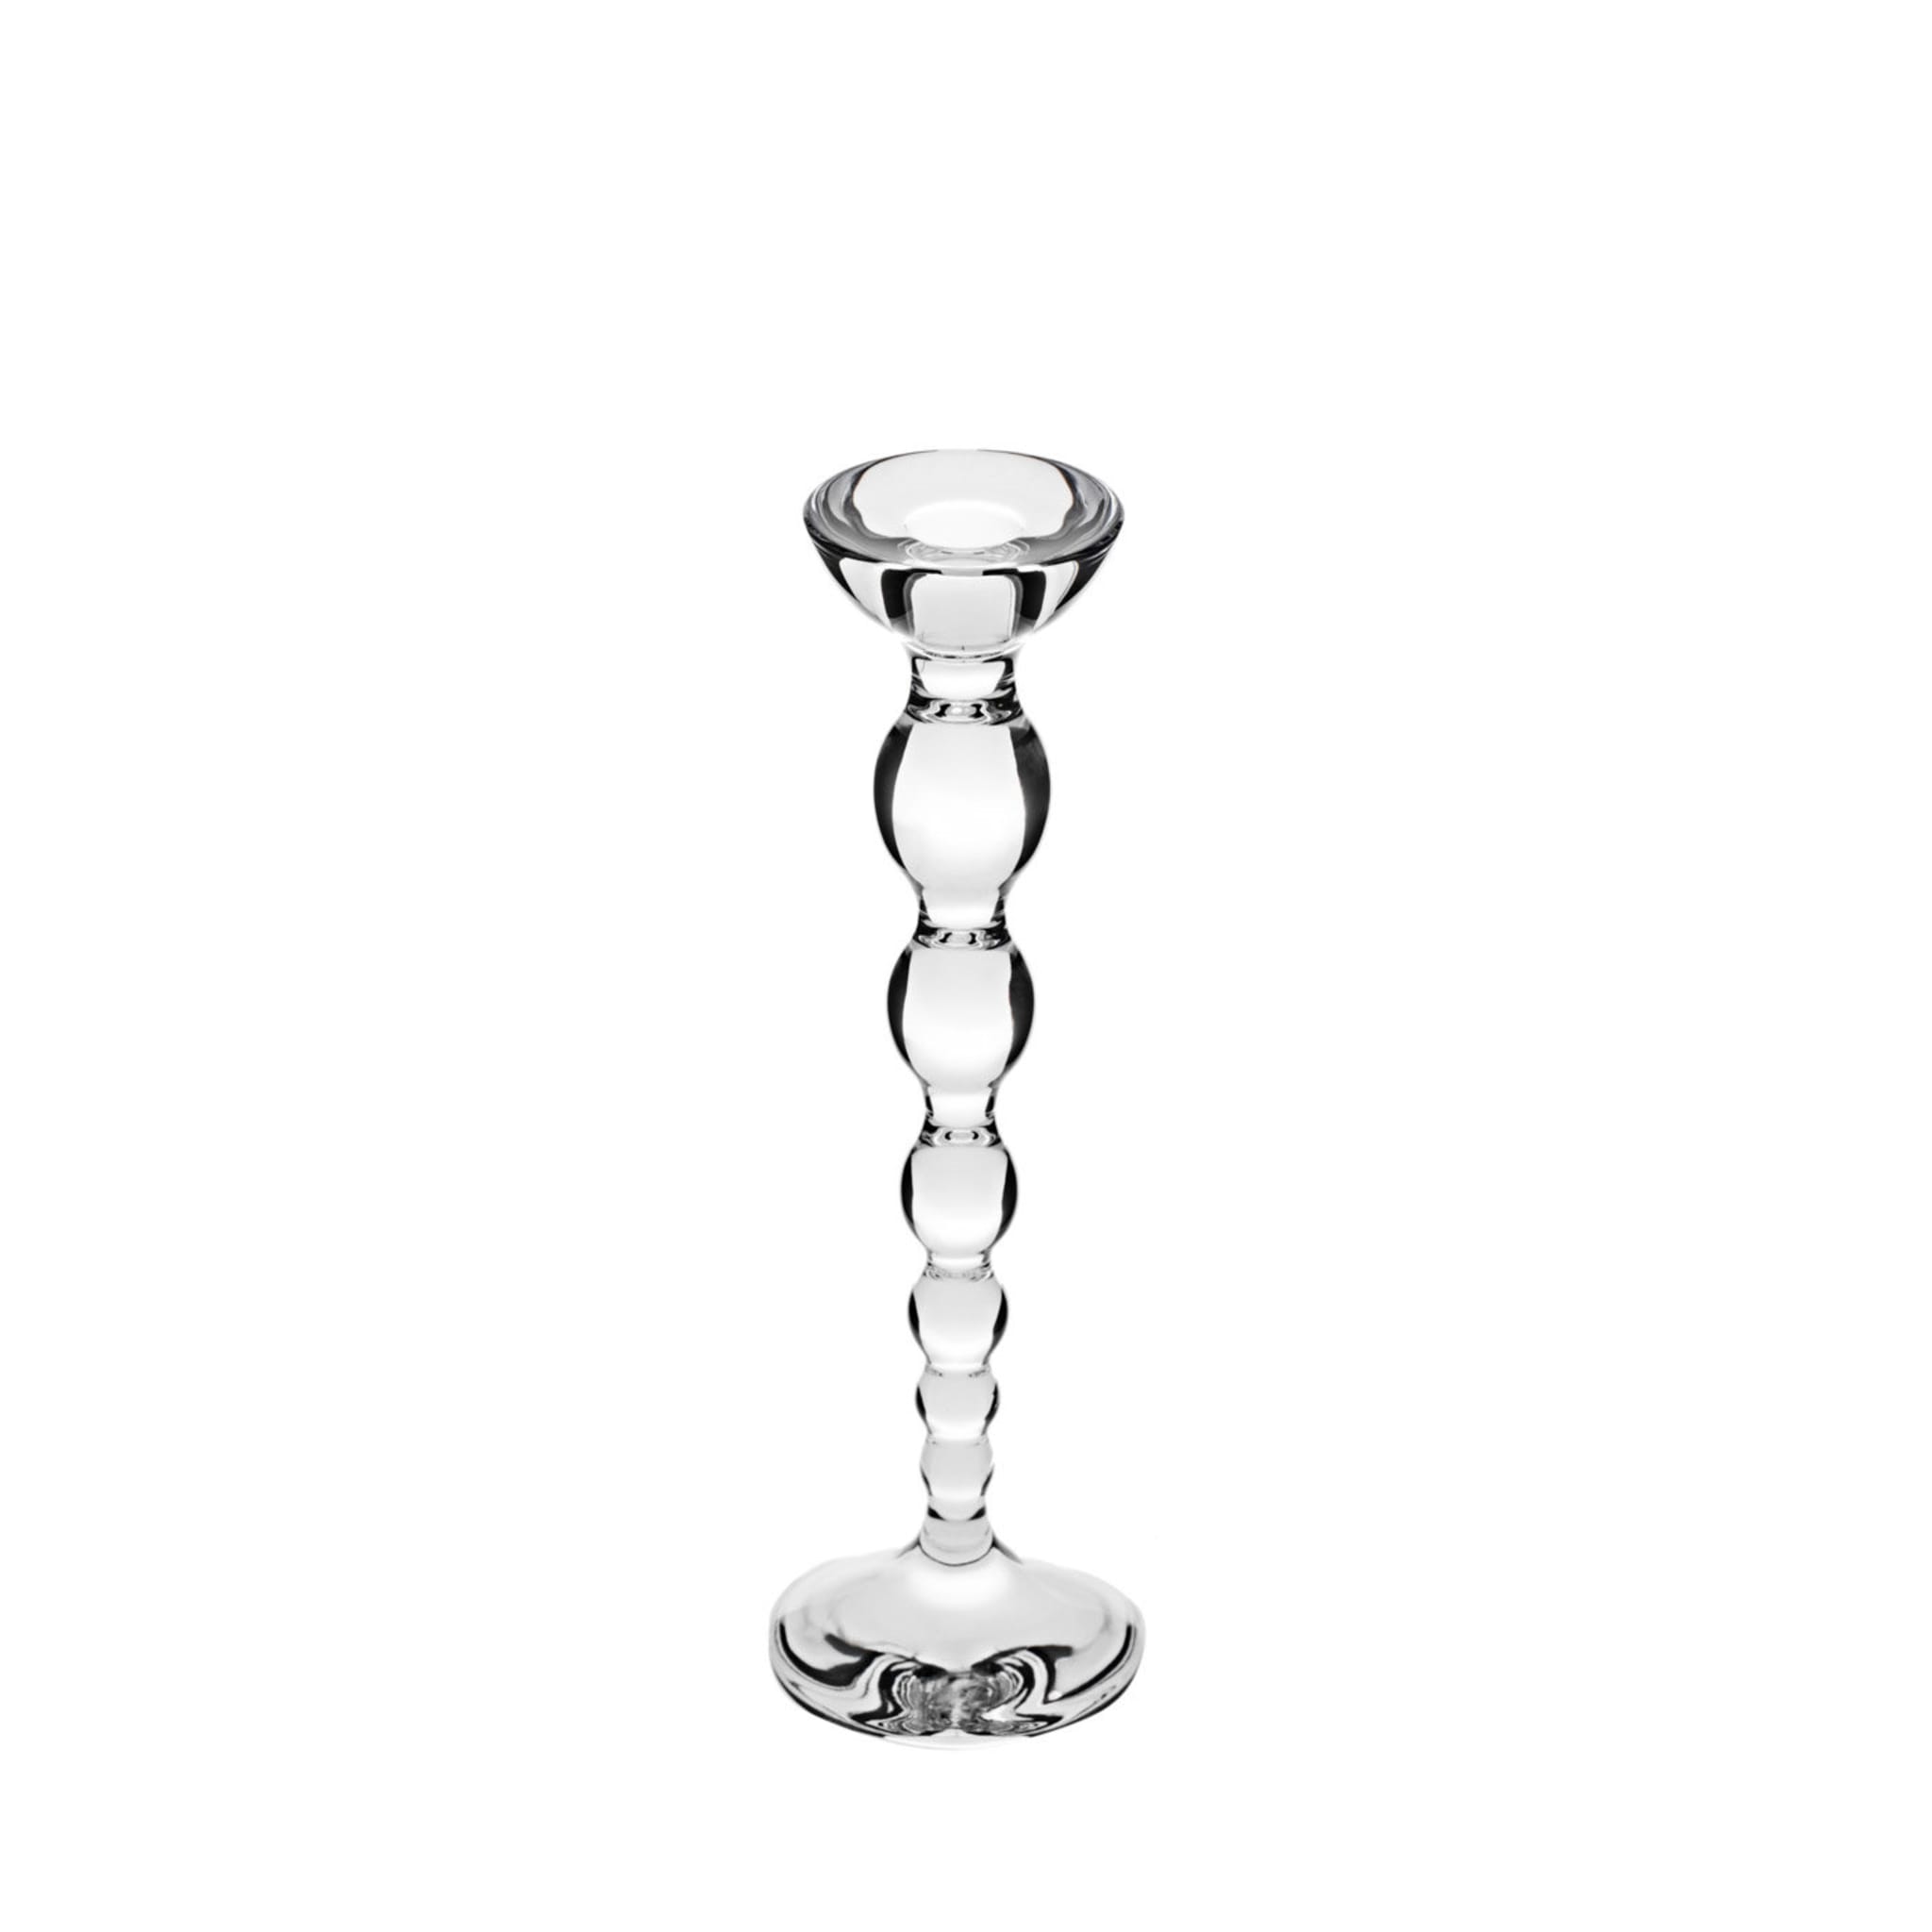 Collier Crystal Candle Holder - Alternative view 1